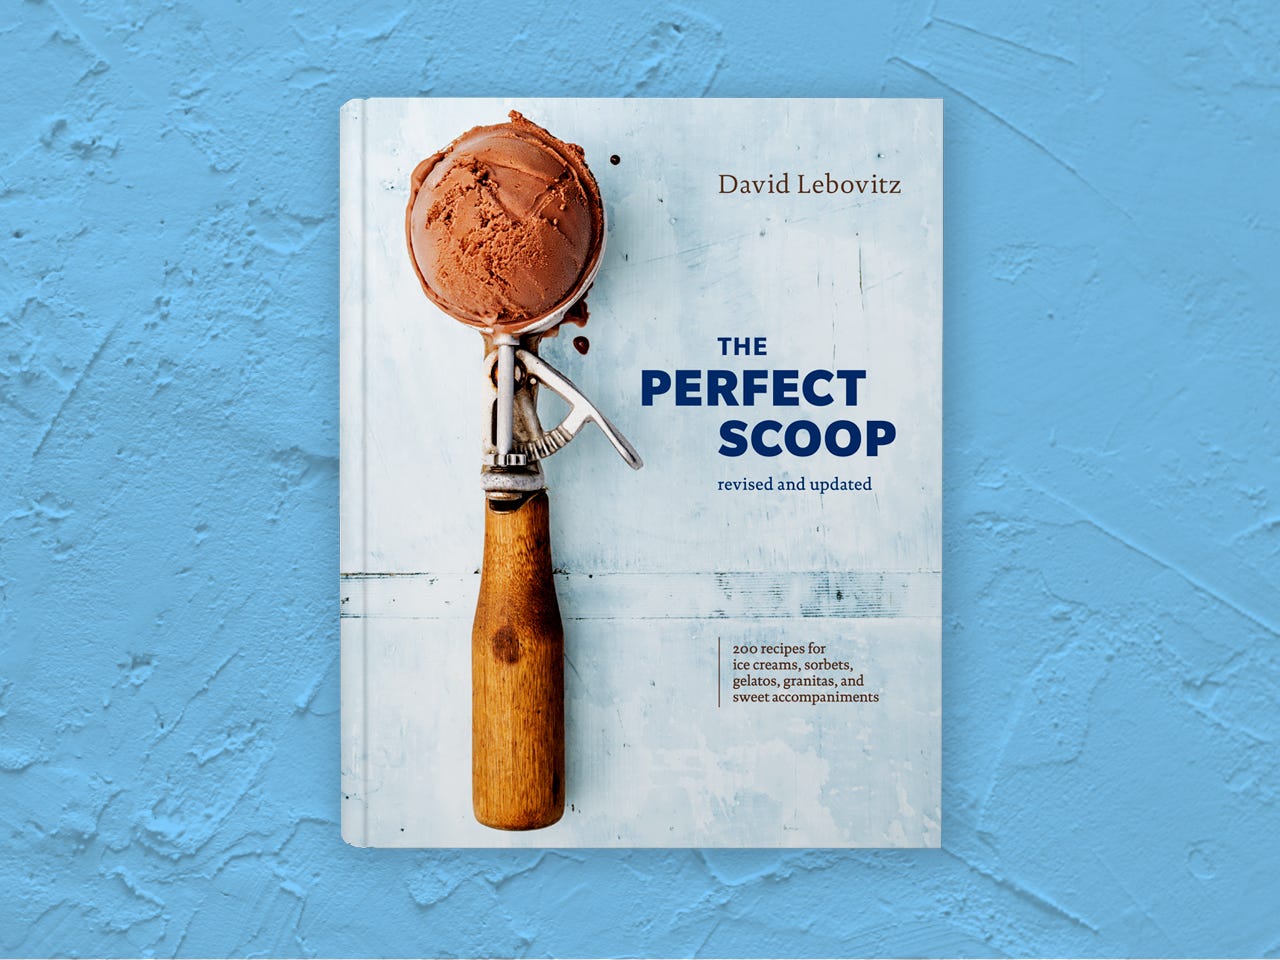 We Reviewed David Lebovitz's Updated The Perfect Scoop | Chatelaine